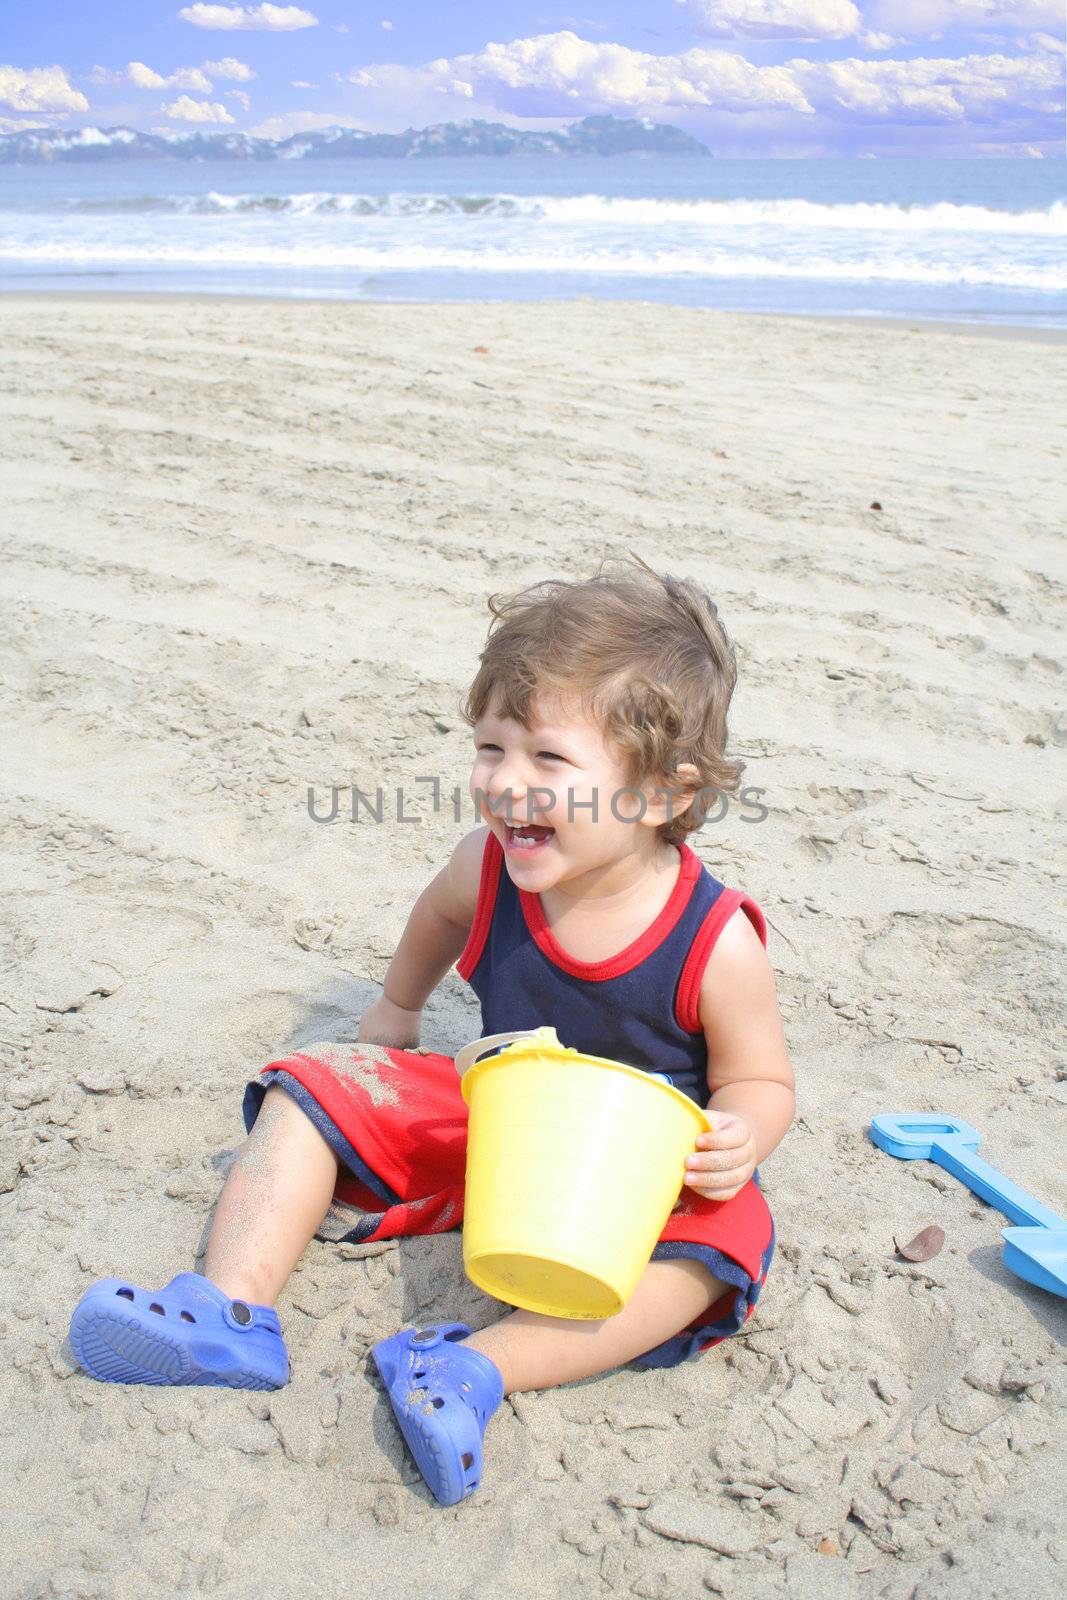 Young child playing in the sand on the beach